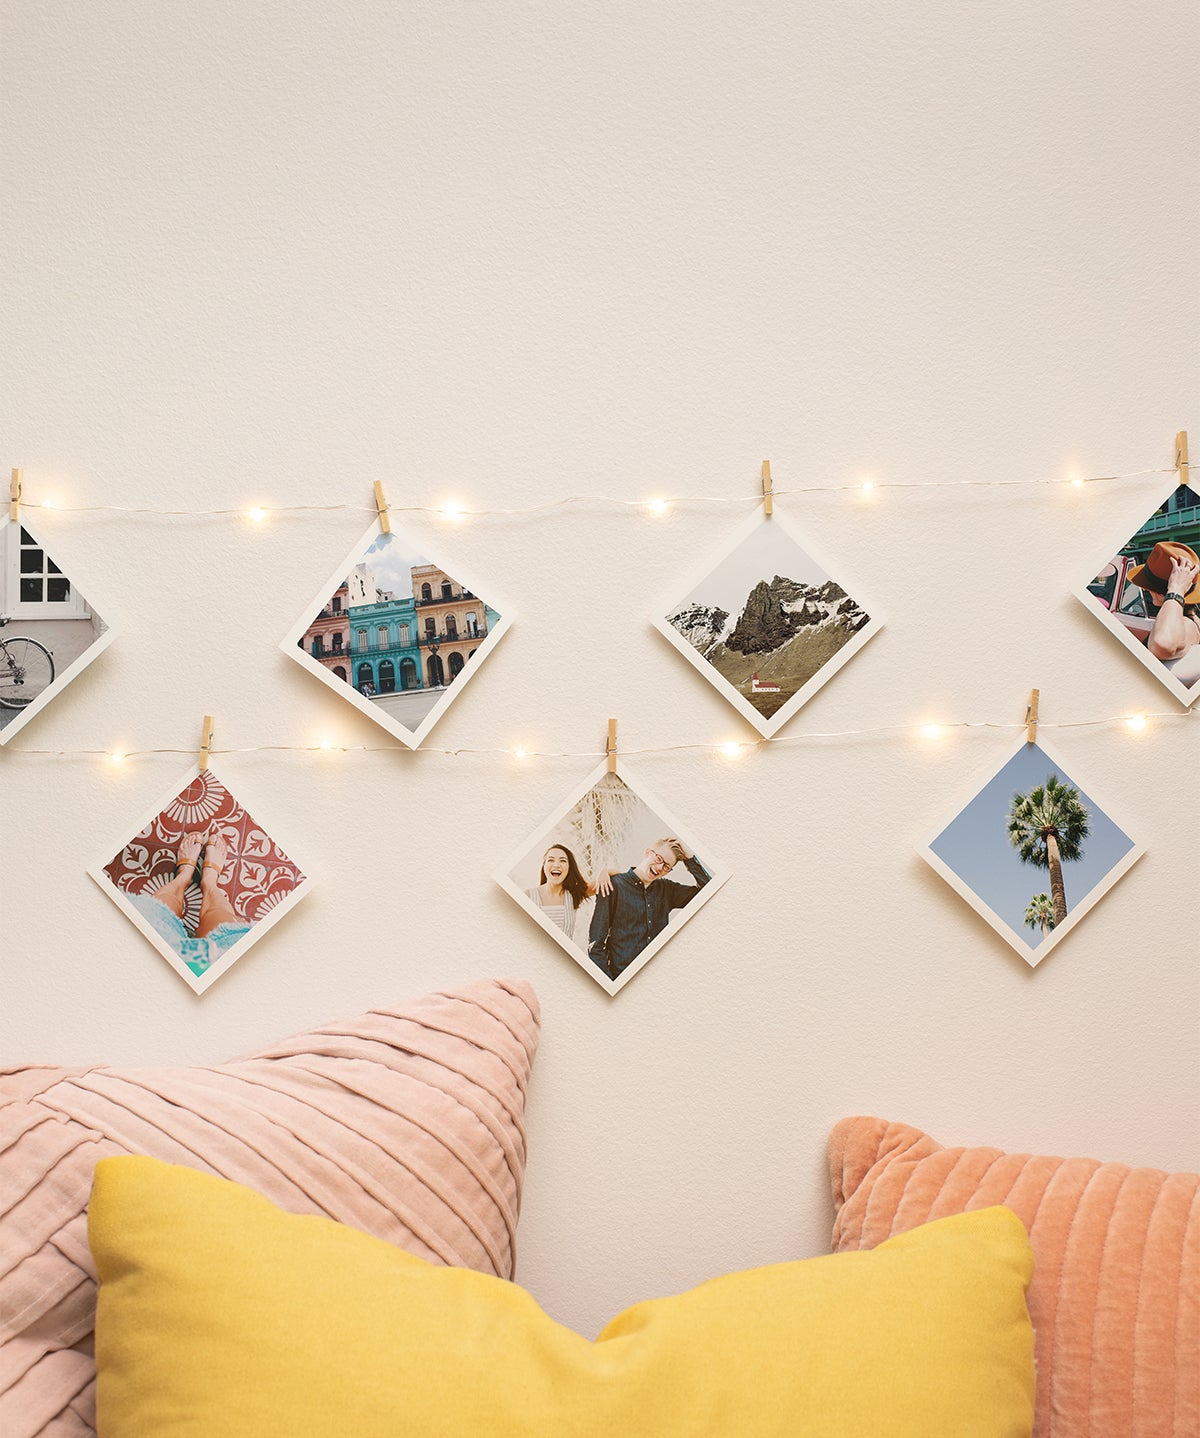 Photo prints hanging from string lights on wall